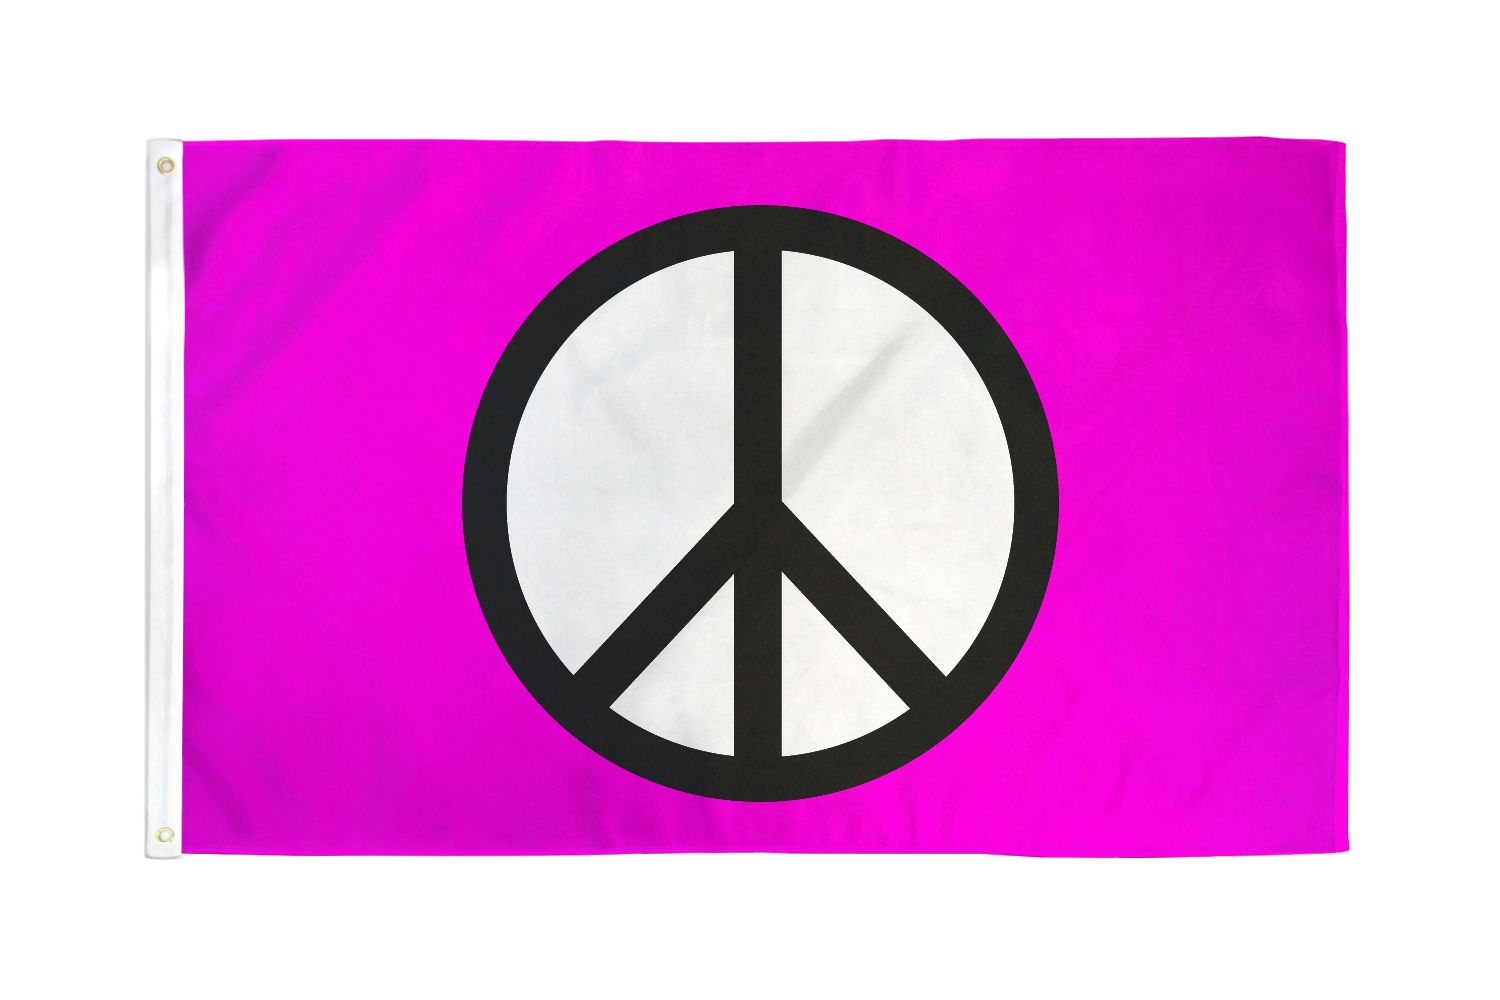 3' x 2' PEACE LOVE HAPPINESS FLAG Happy Smiley Face Rainbow Pride Festival 